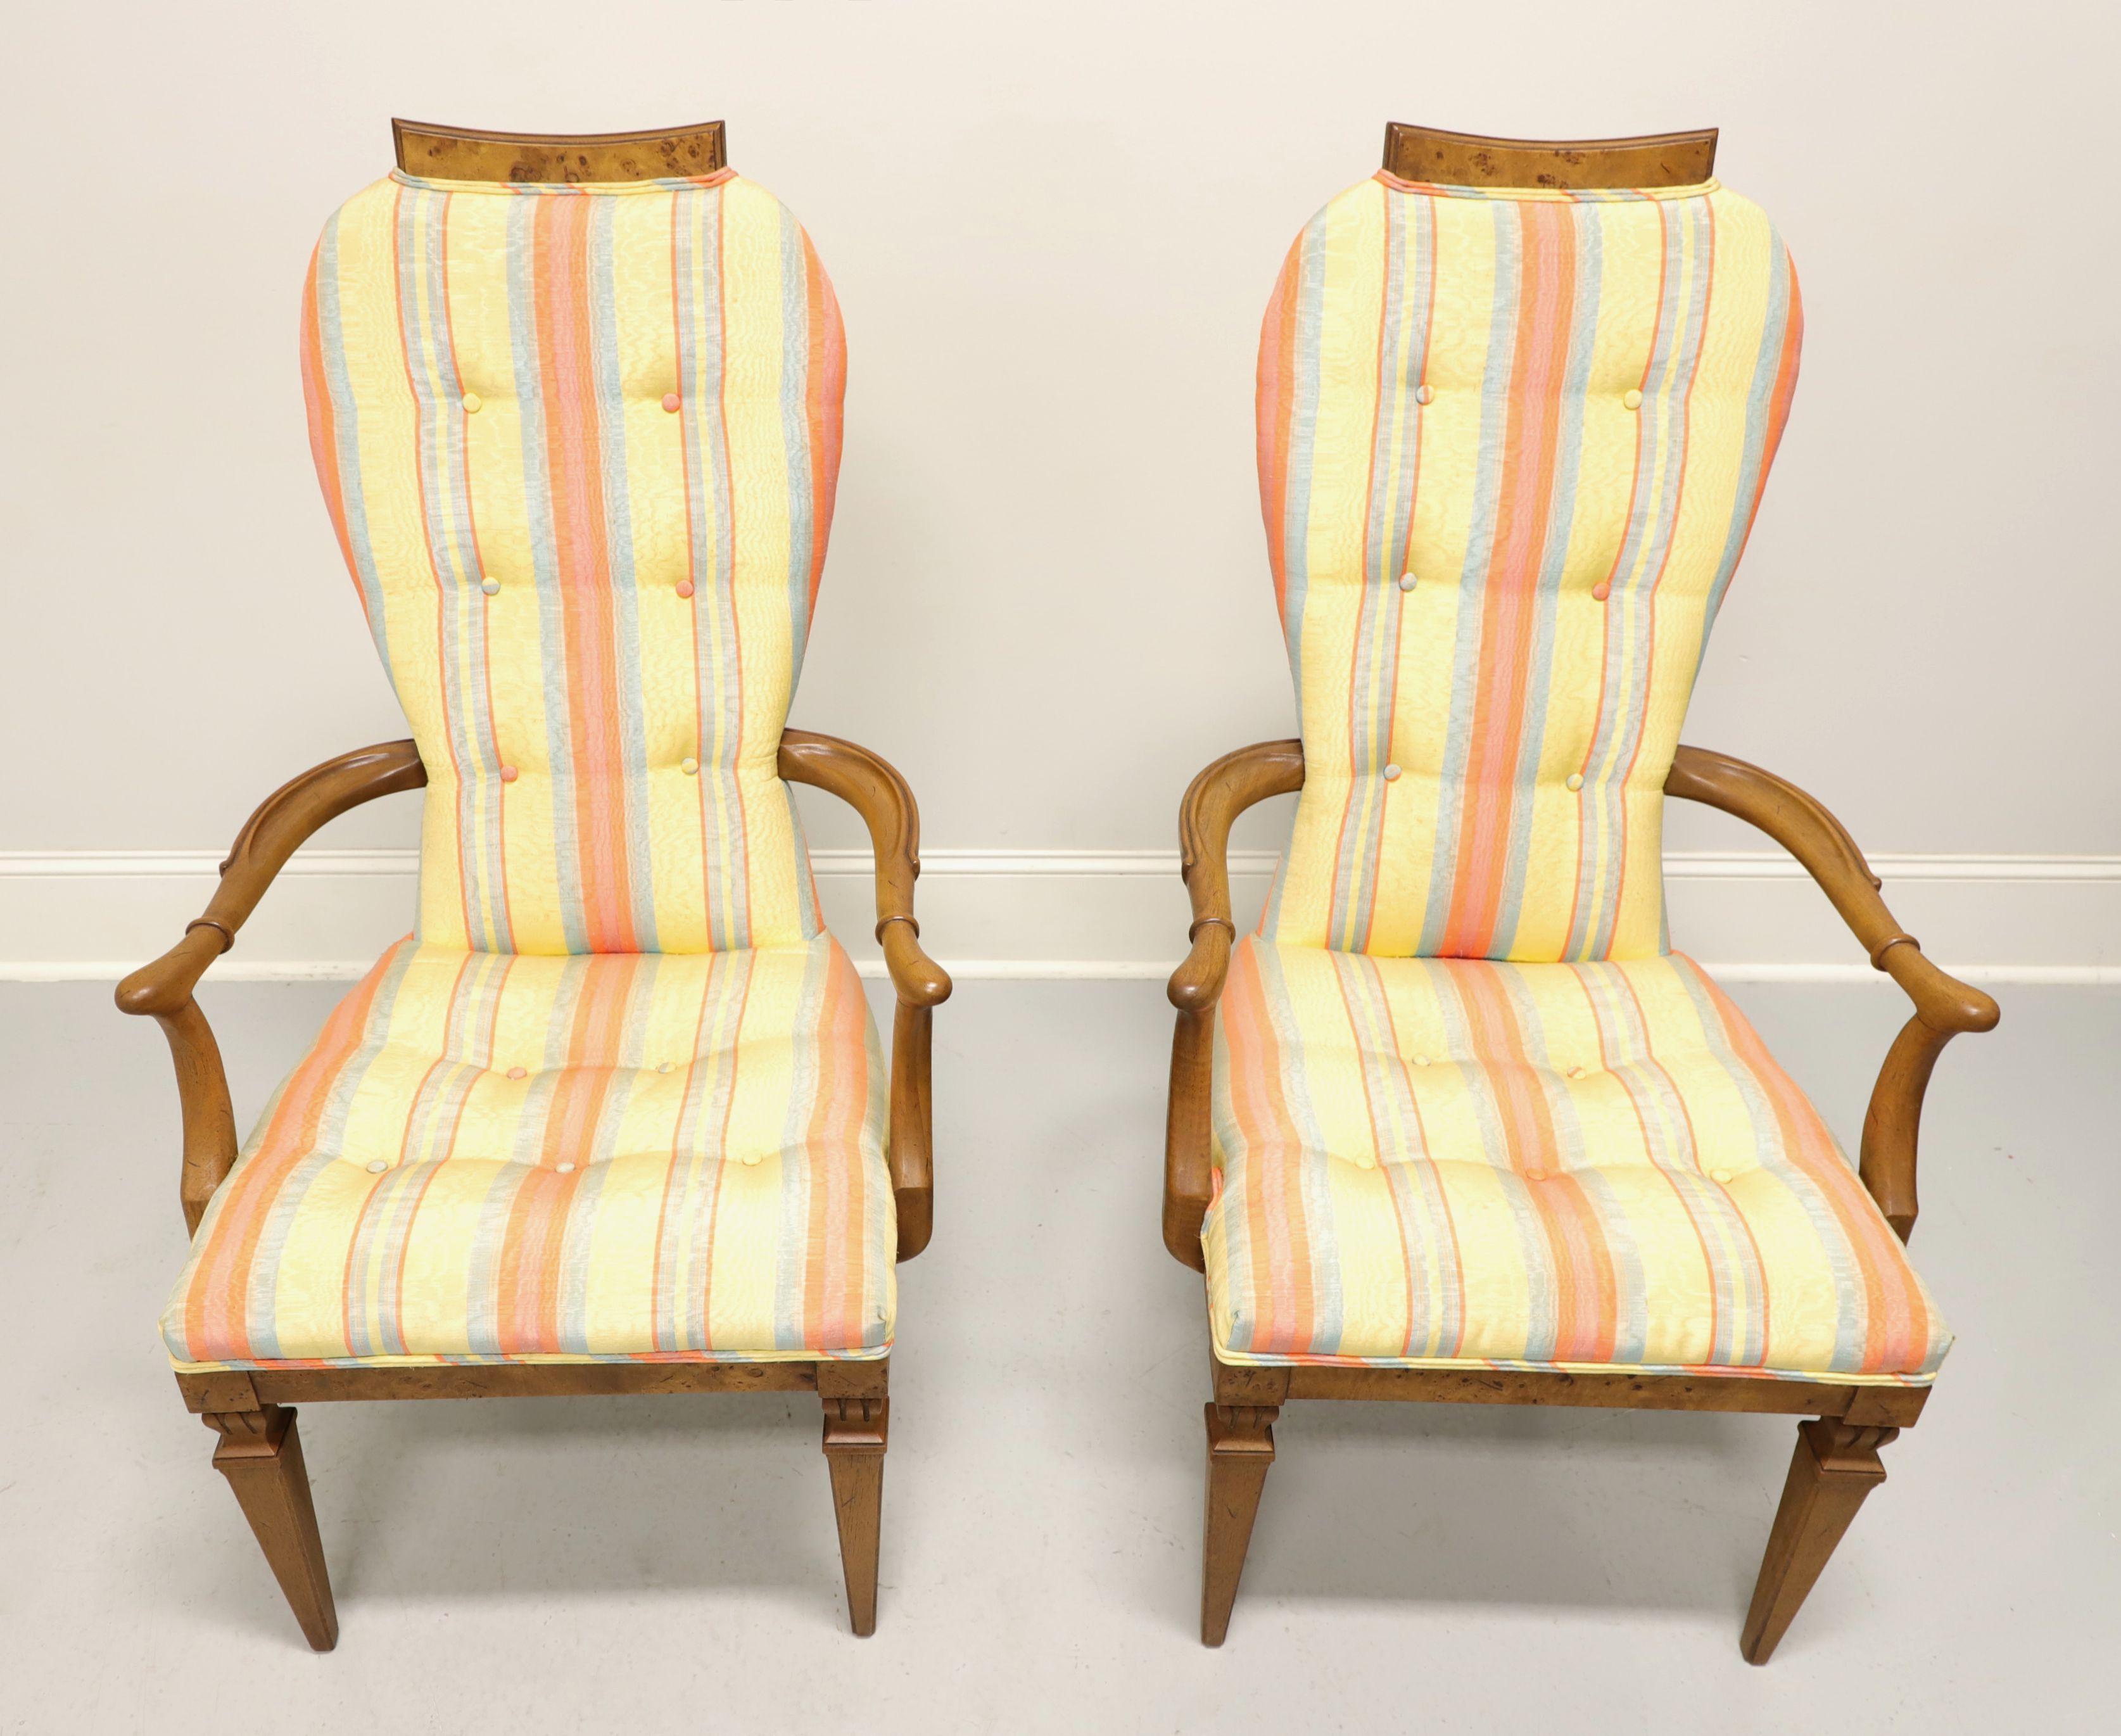 A pair of Mid 20th Century Neoclassical style upholstered dining armchairs by Tomlinson Furniture. Walnut with their Tokay finish, slight distressing, inlaid burl wood to crest rail & apron, curved carved arms, button tufted striped fabric